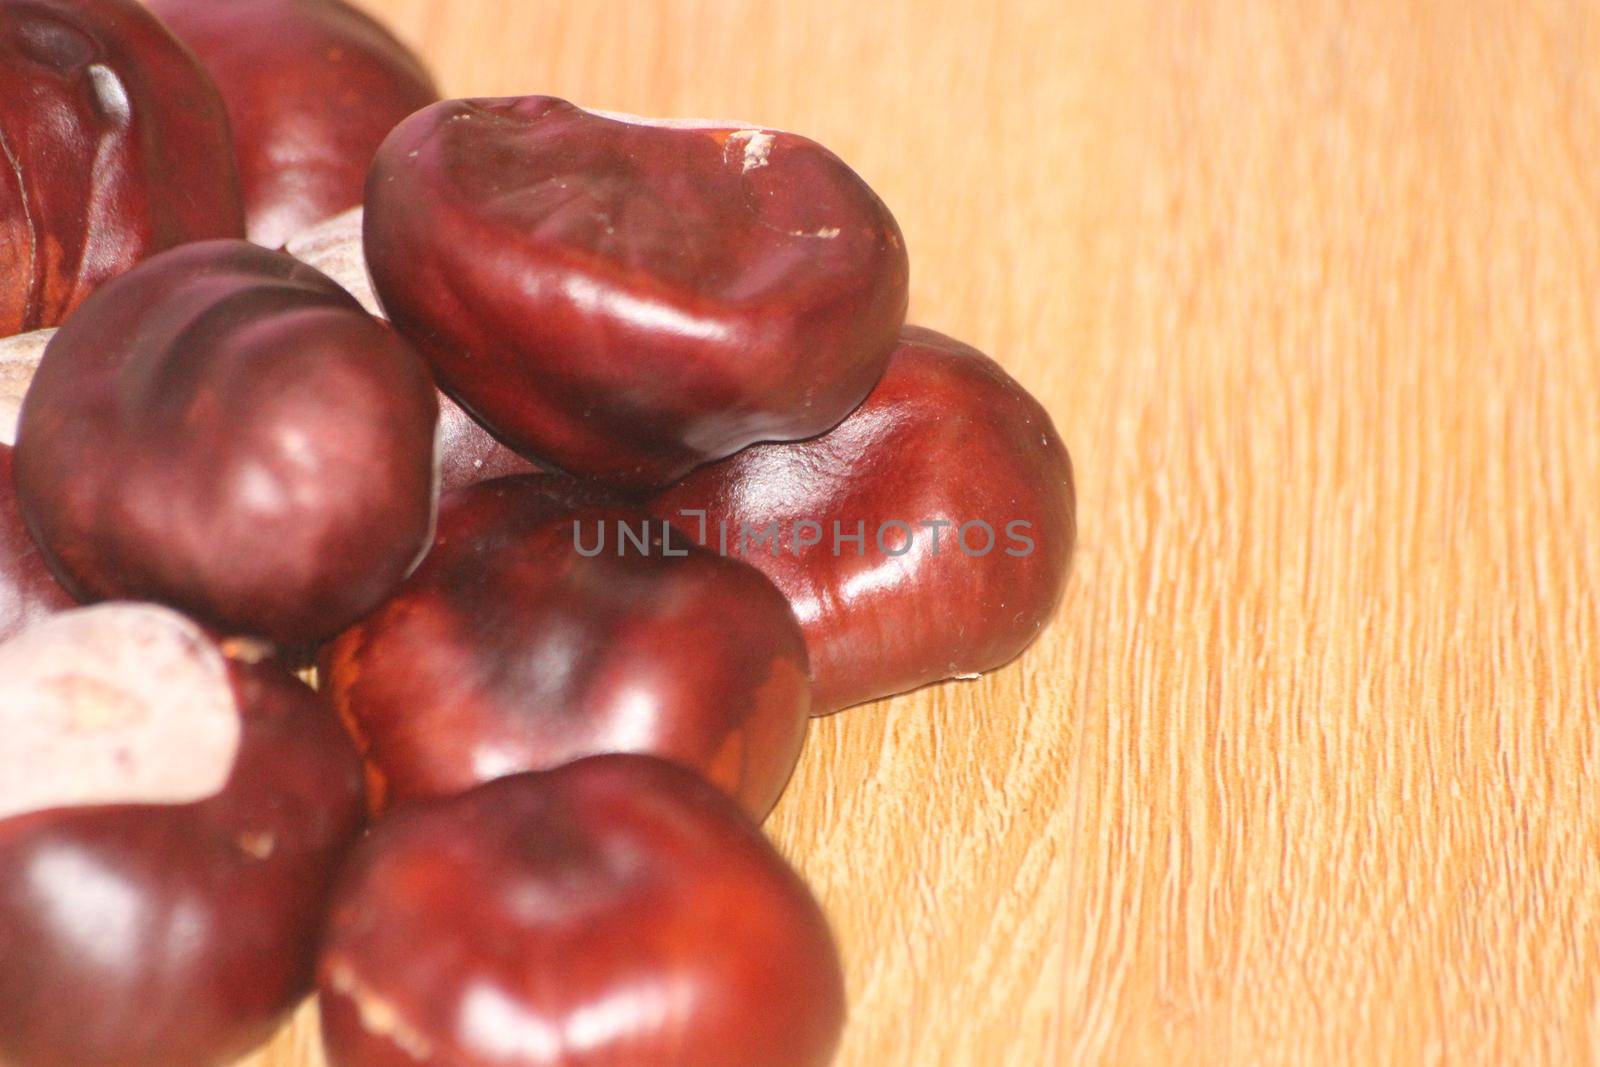 Chestnut and chestnut pod with spines on a wooden floor. Close-Up of bunch of dried chestnut fruits over wooden background.